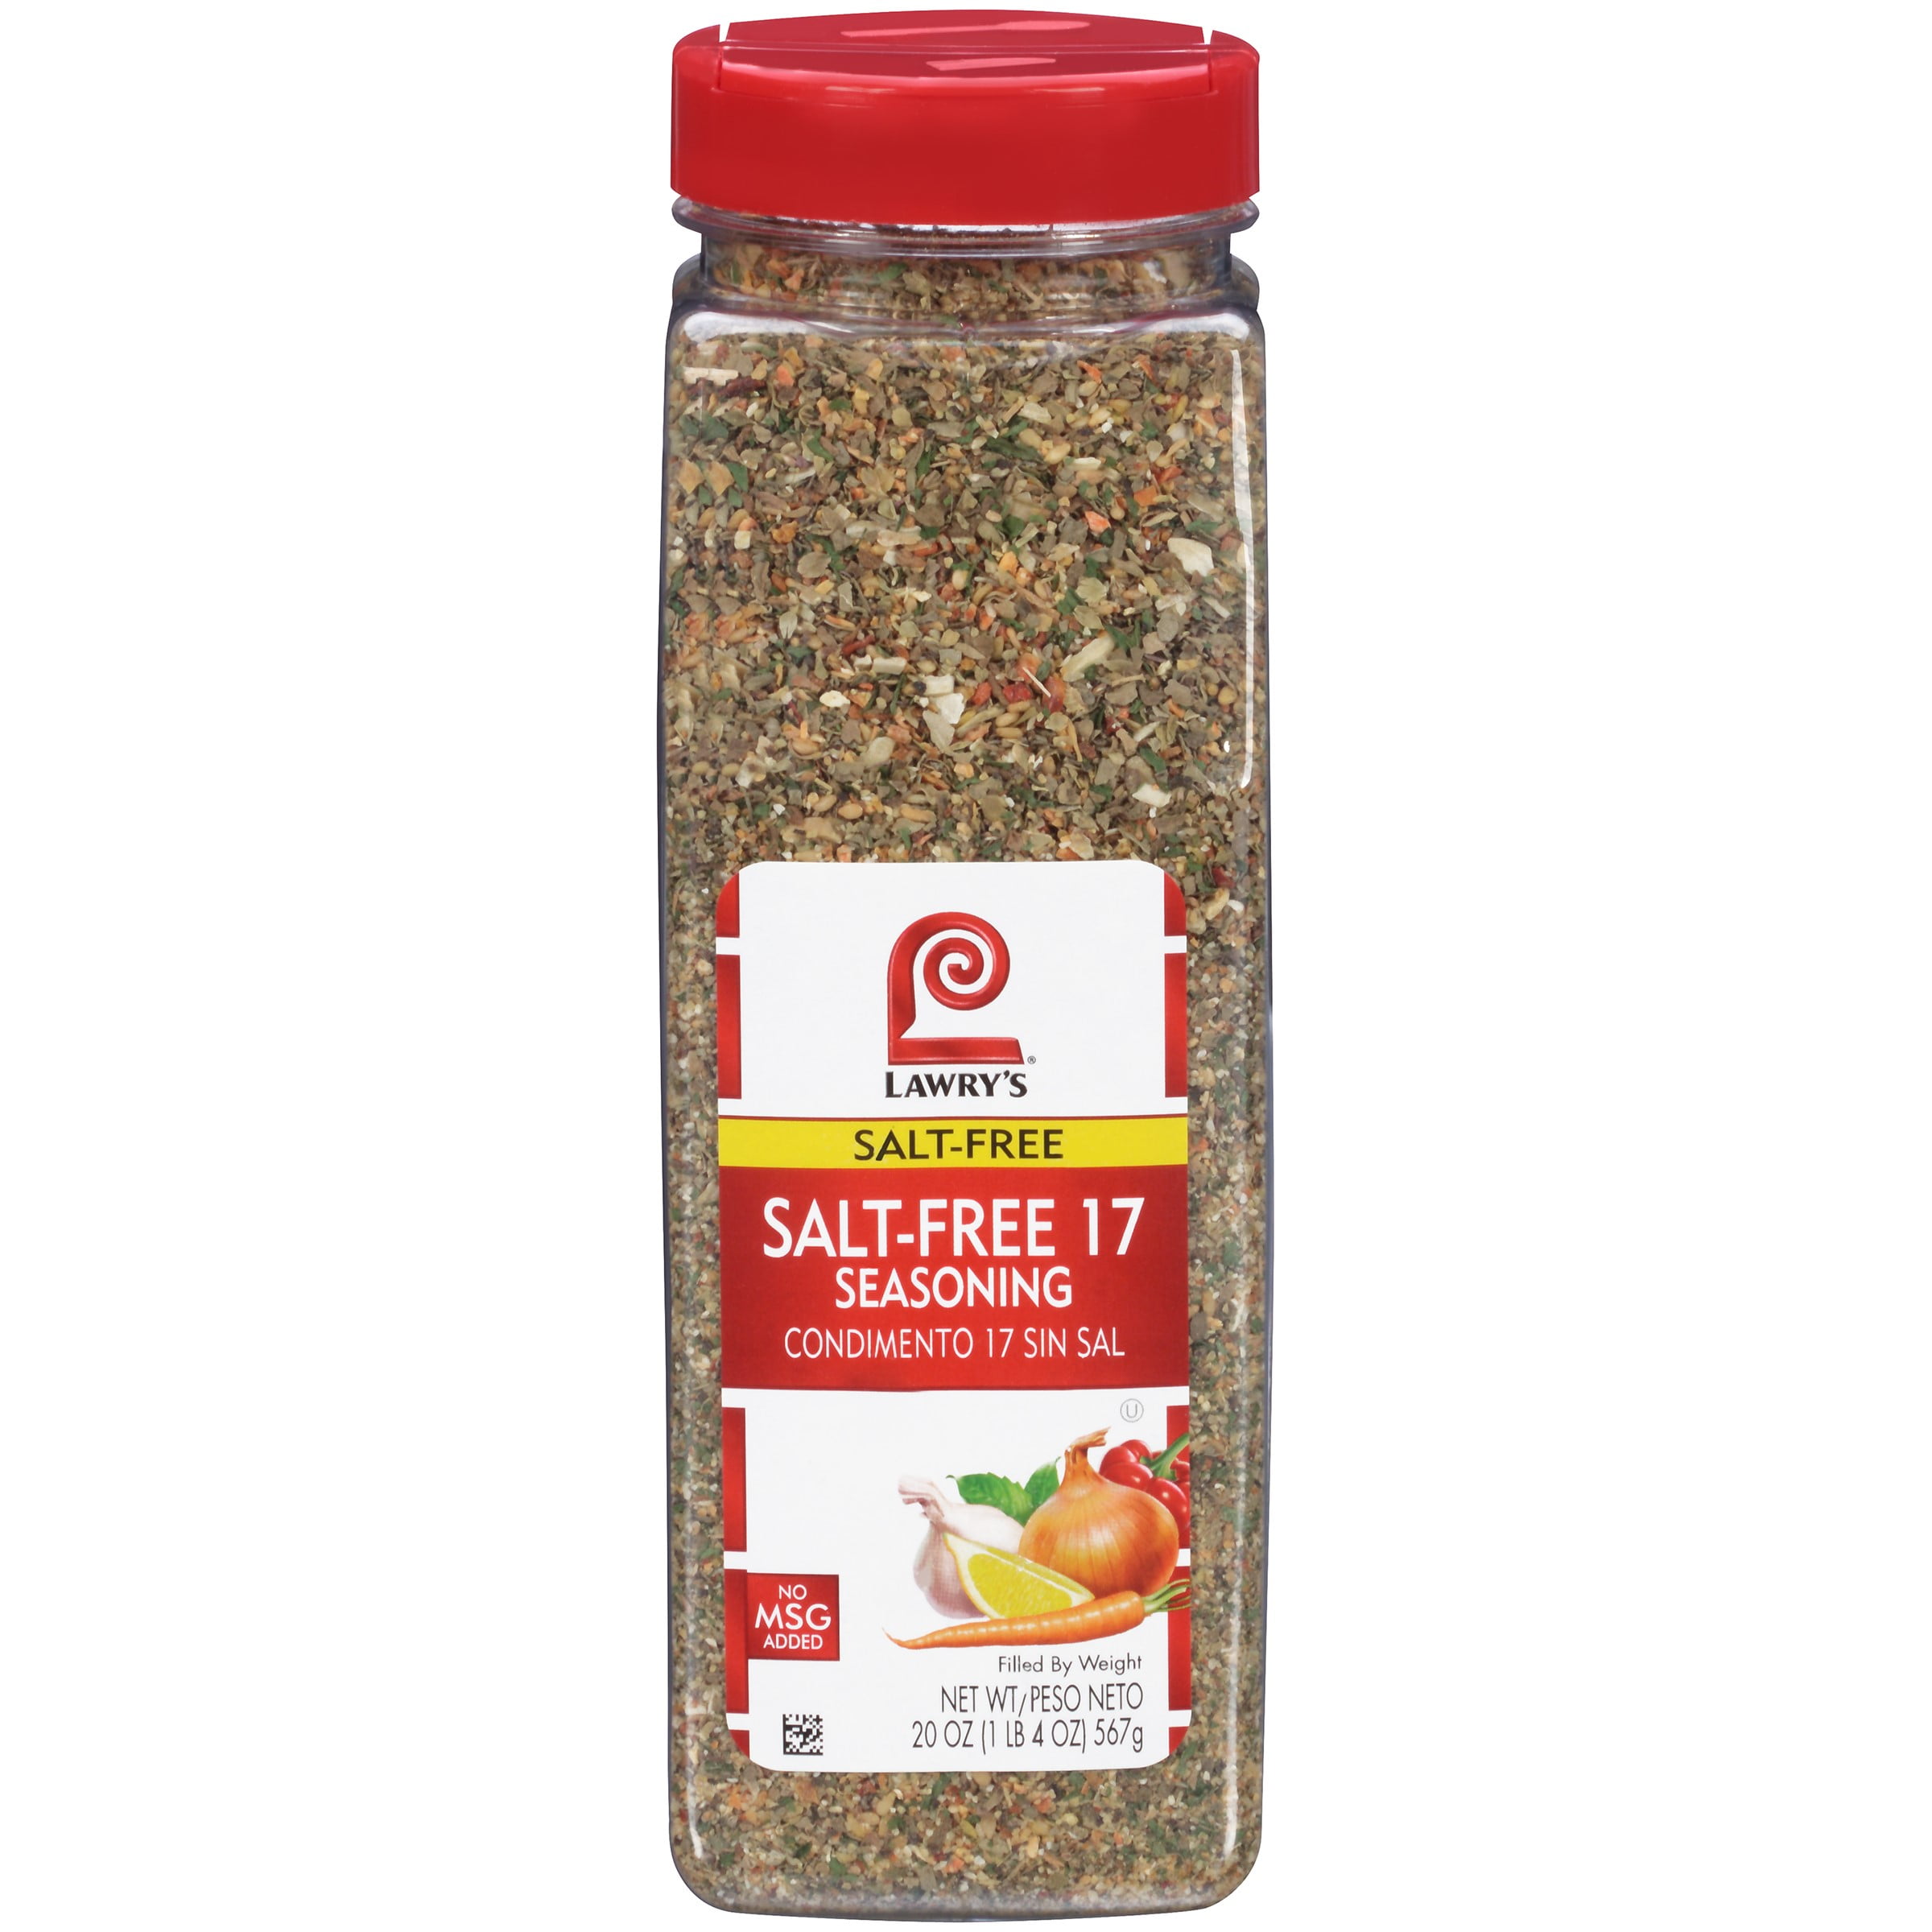 Lawry's Salt Free 17 Seasoning, 10 oz - One 10 Ounce Container of 17  Seasoning Spice Blend Including Toasted Sesame Seeds, Turmeric, Basil and  Red Bell Pepper for Seafood Poultry and Beef 10 Ounce (Pack of 1)